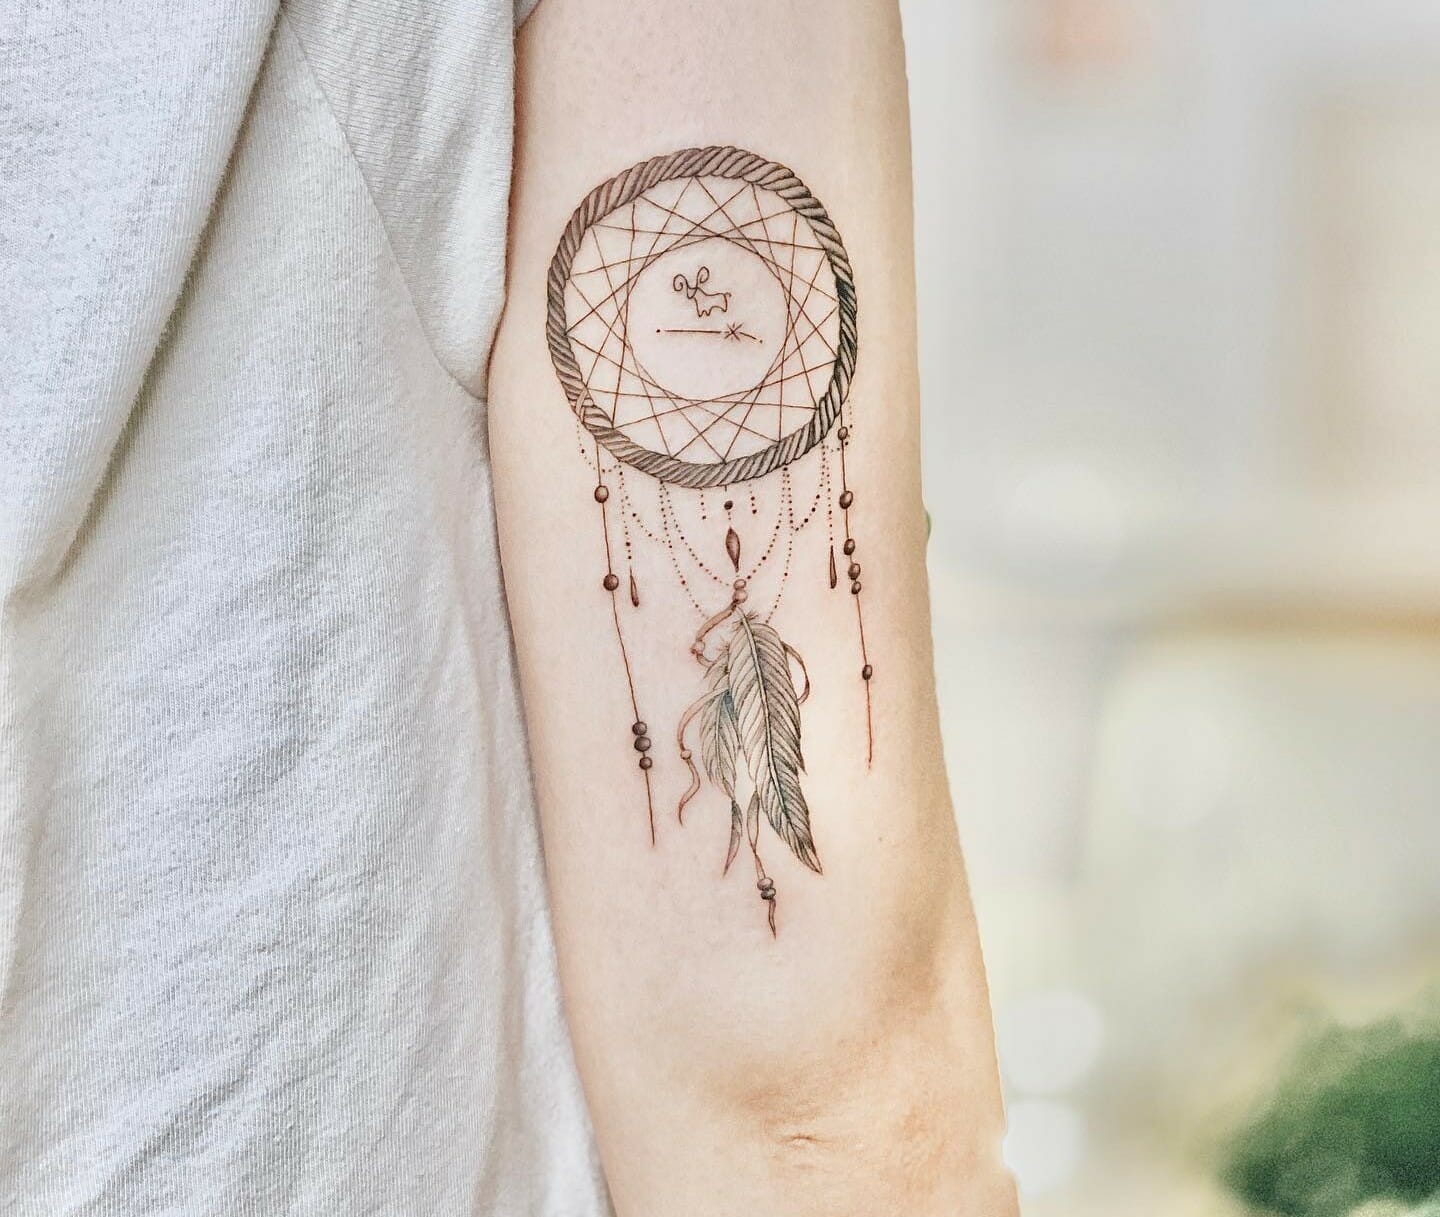 12 Girly Capricorn Sign Tattoo Ideas To Inspire You  alexie